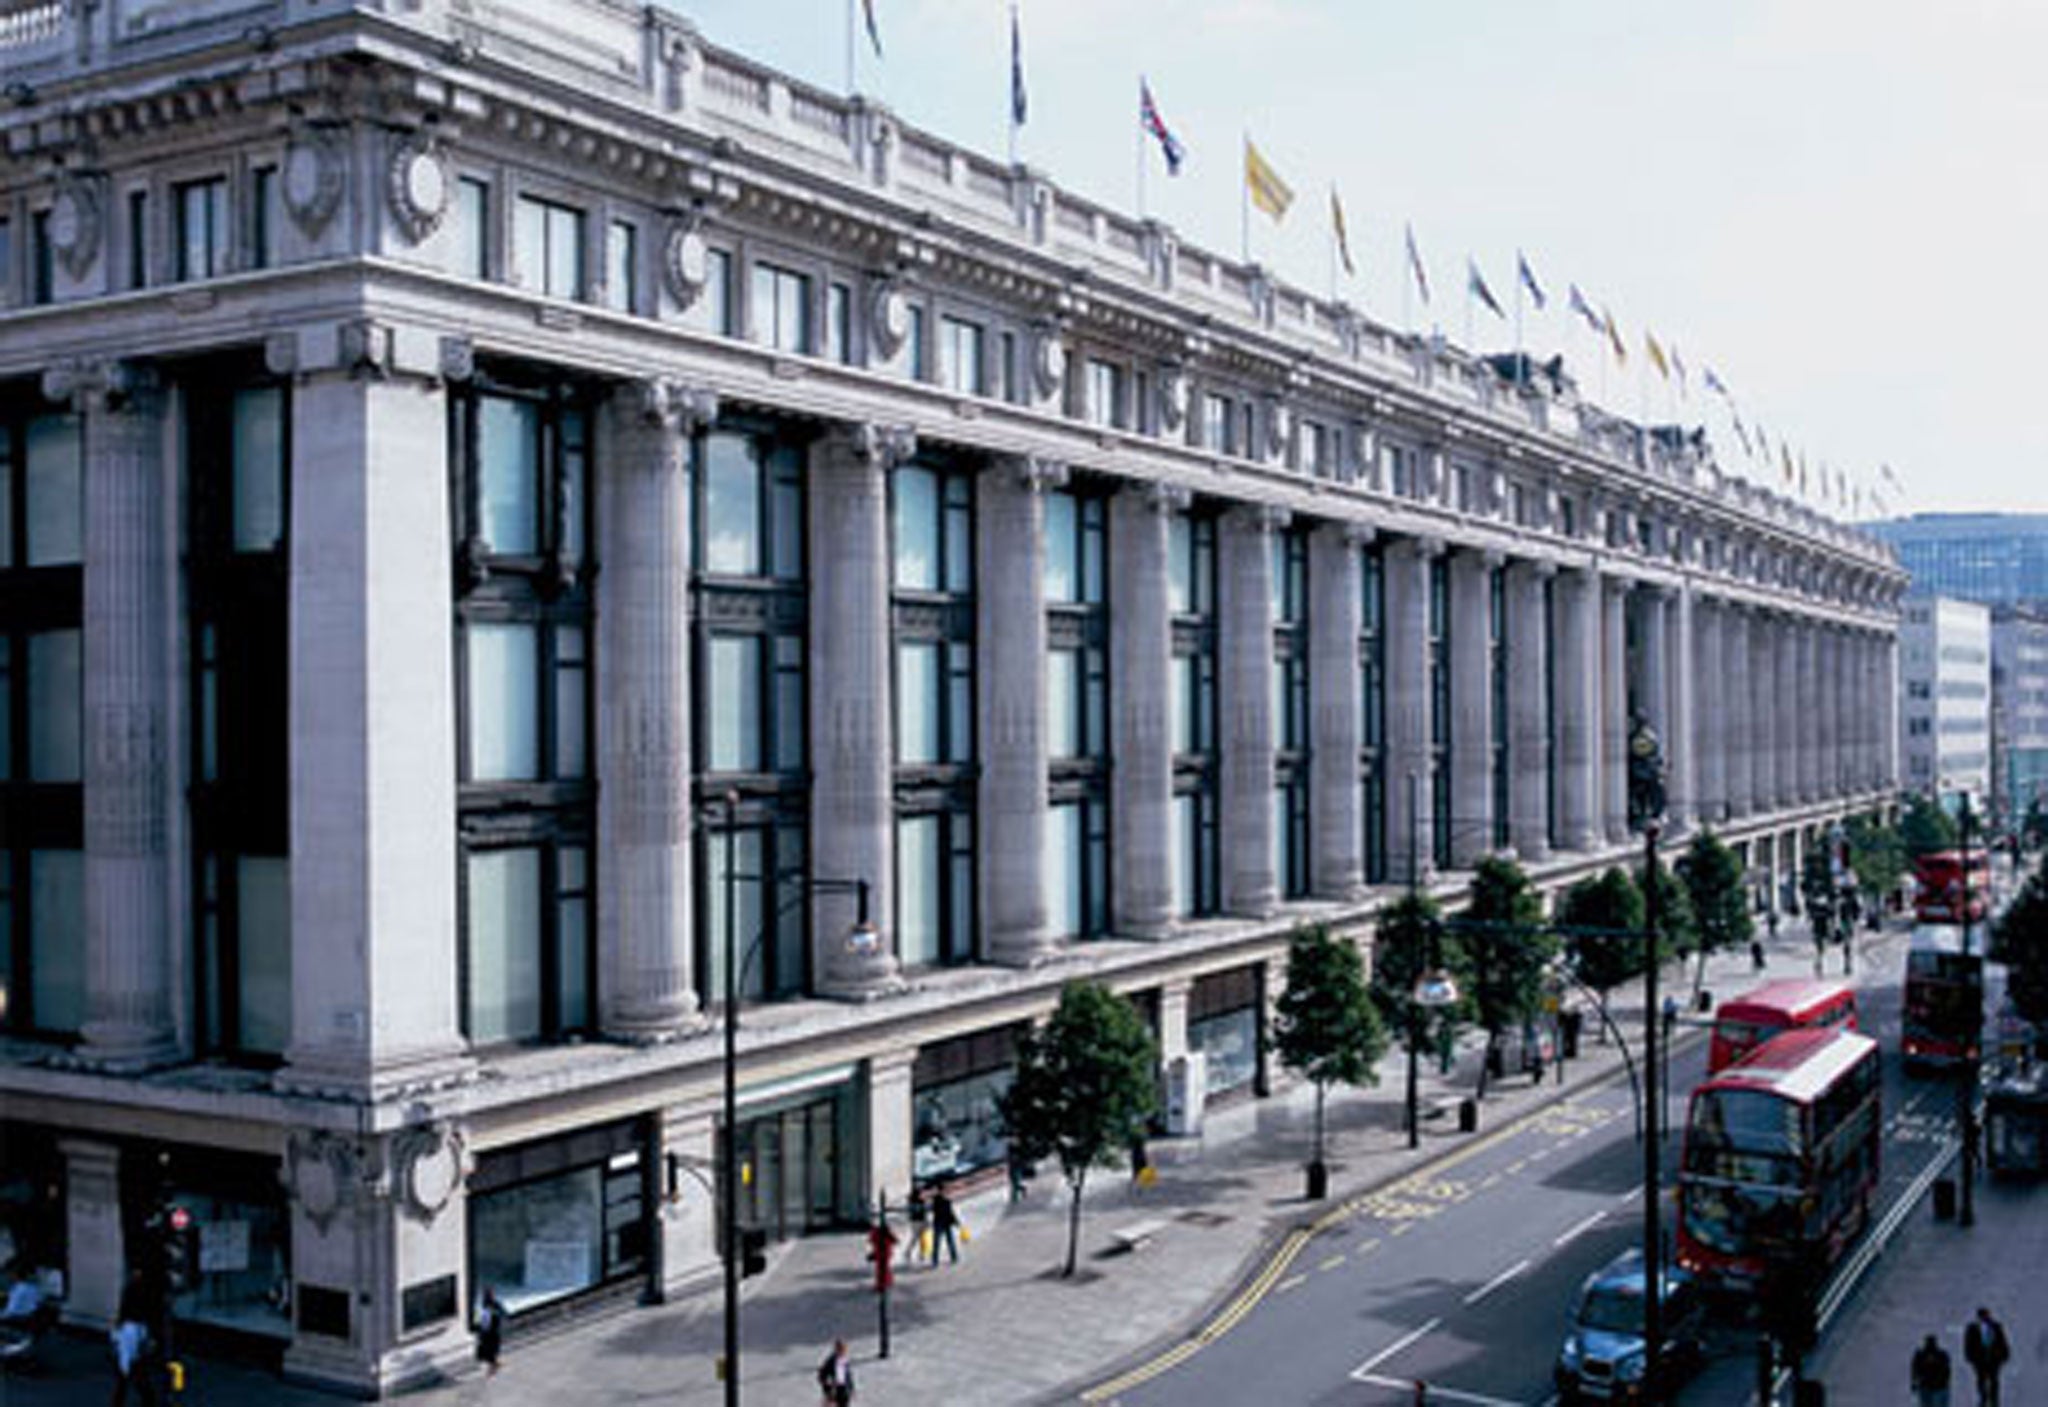 Selfridges taken to court for selling unpasteurised raw milk from a